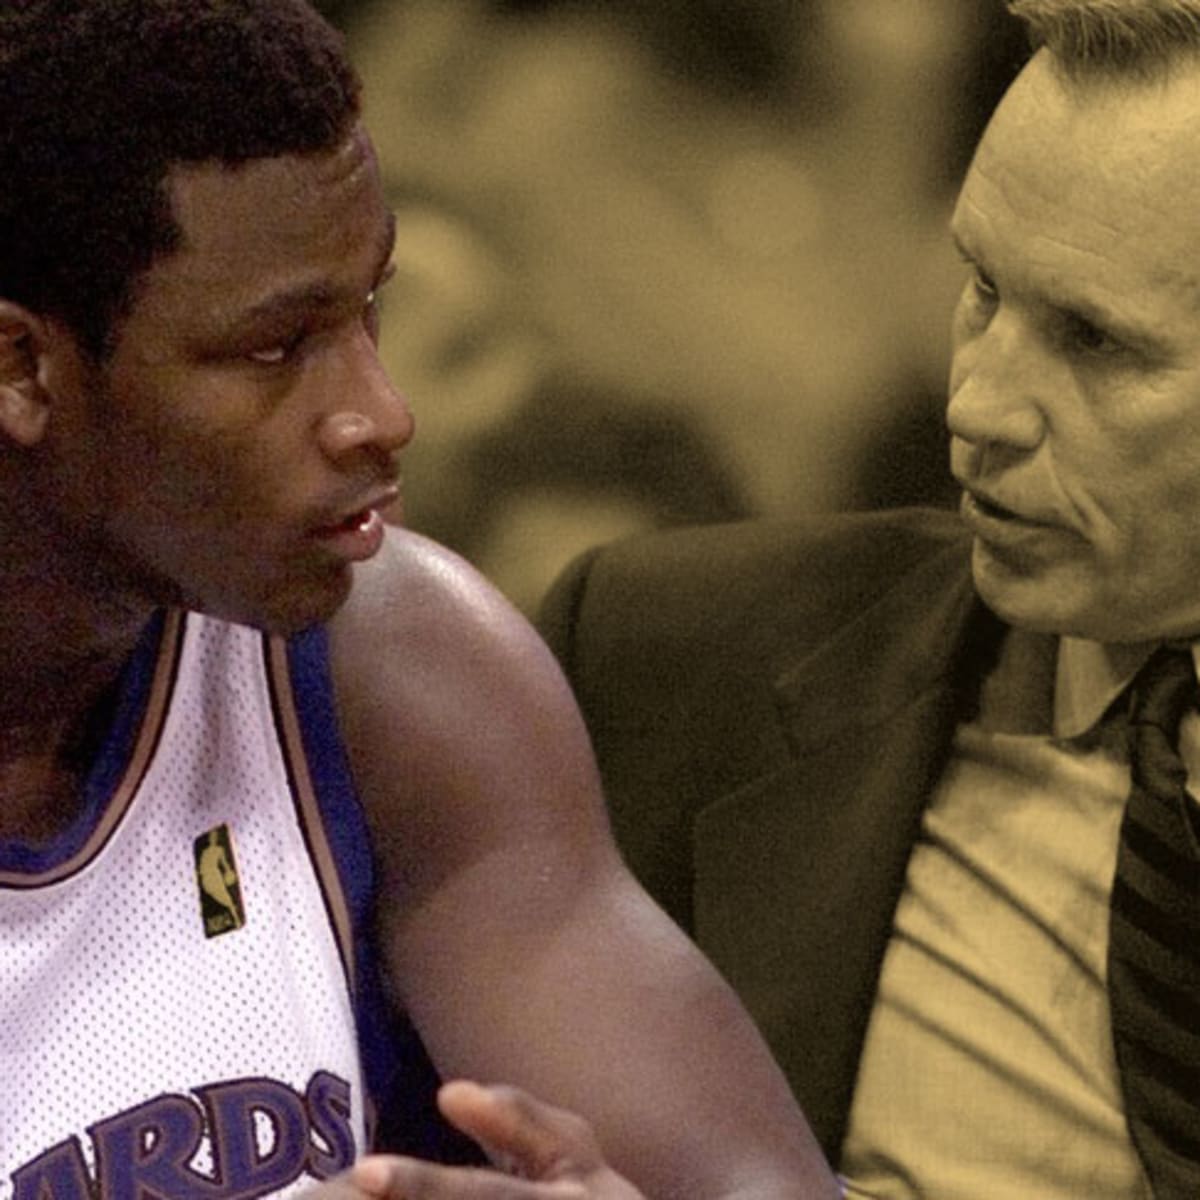 He may even play some point guard — When Kwame Brown's coach